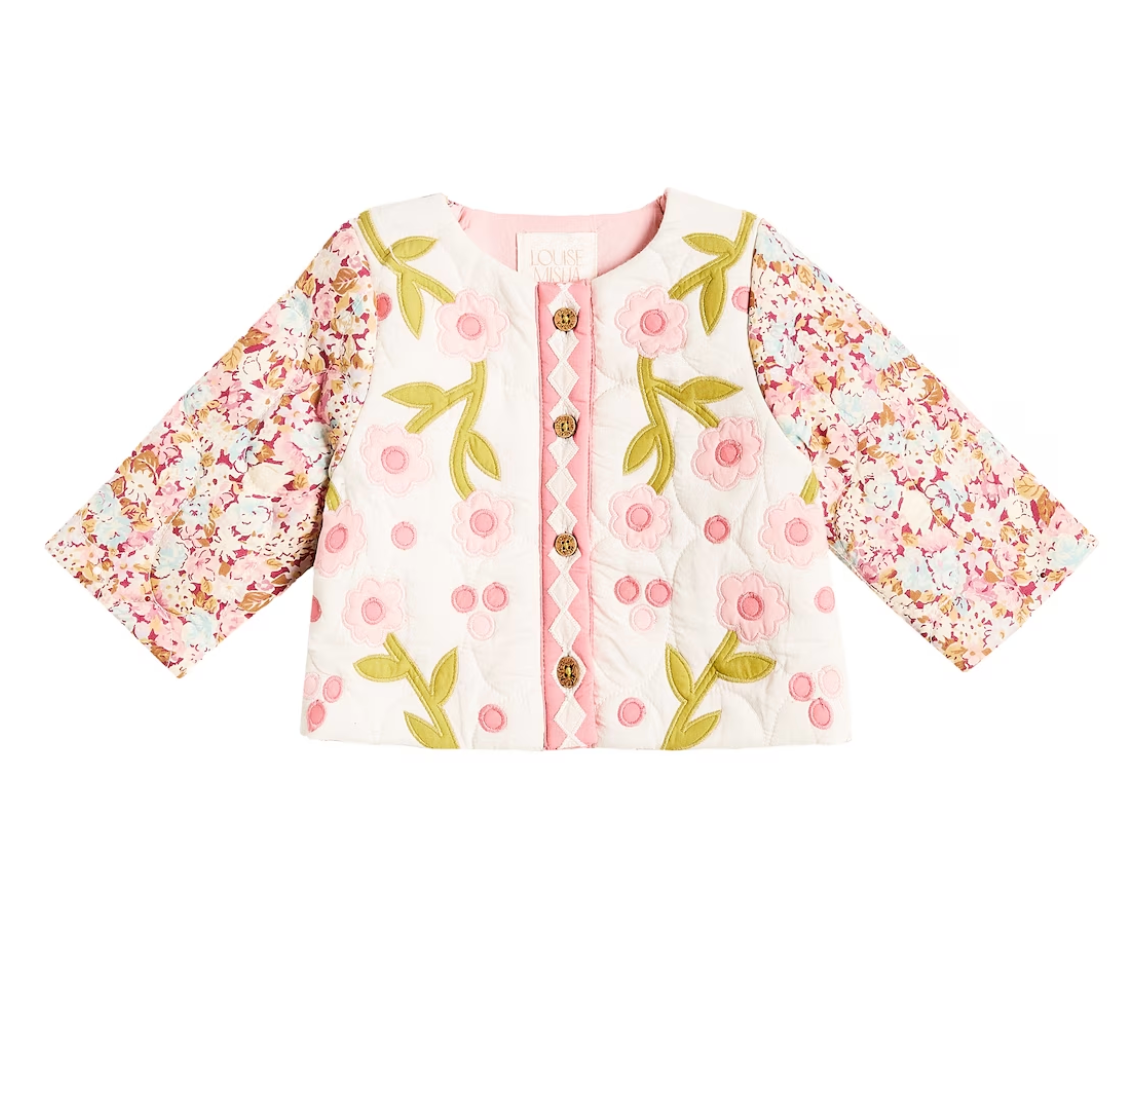 A quilted patchwork jacket filled with colorful flowers. Made with 100% organic cotton, including the lining. Louise misha orisha patchwork jacket.